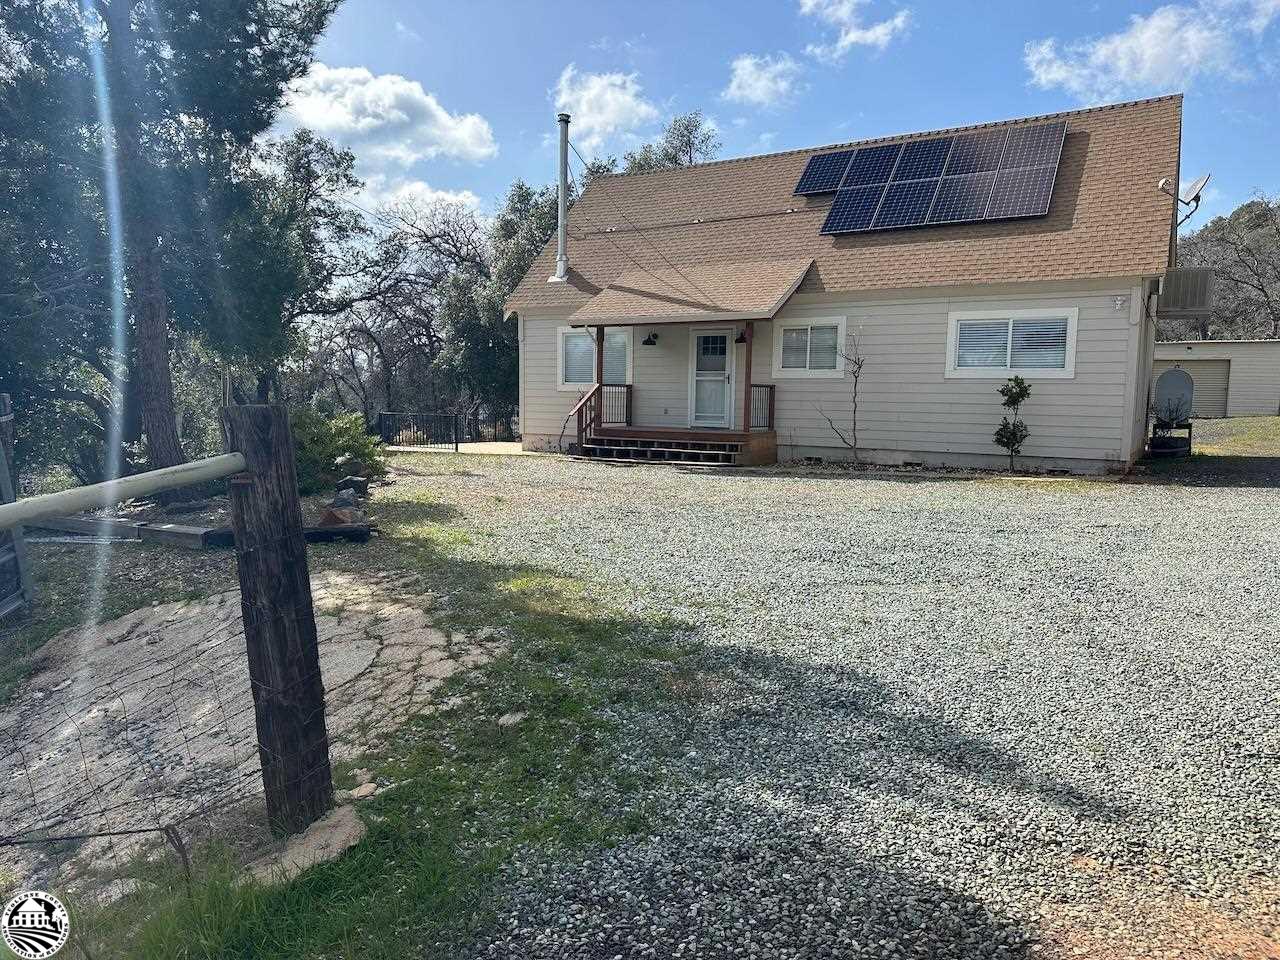 Photo of 20278 Sturgis Rd in Sonora, CA